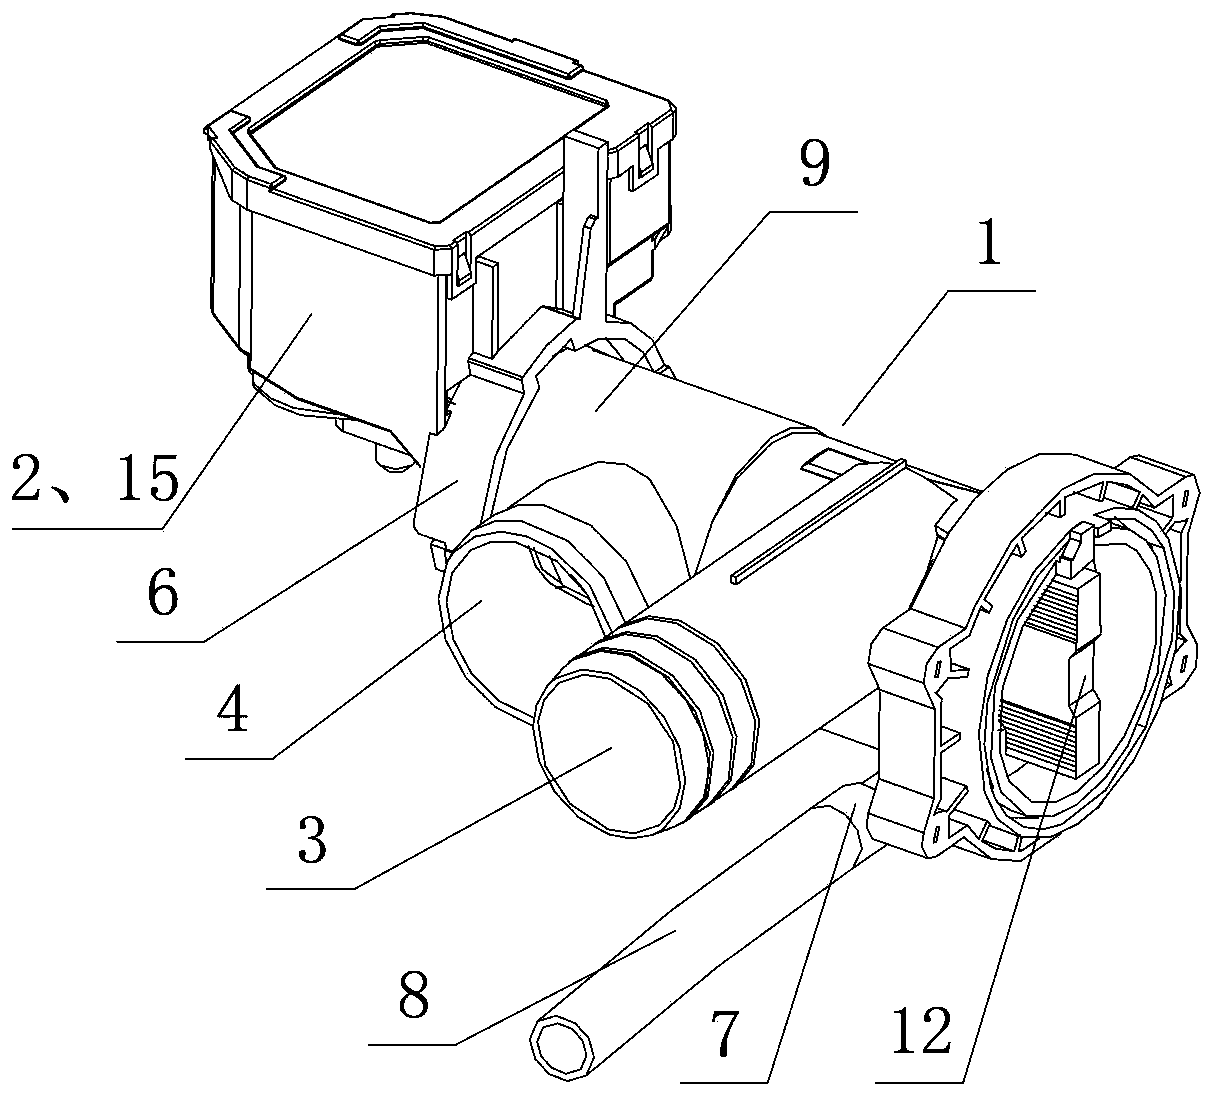 Integrated drainage component and washing machine